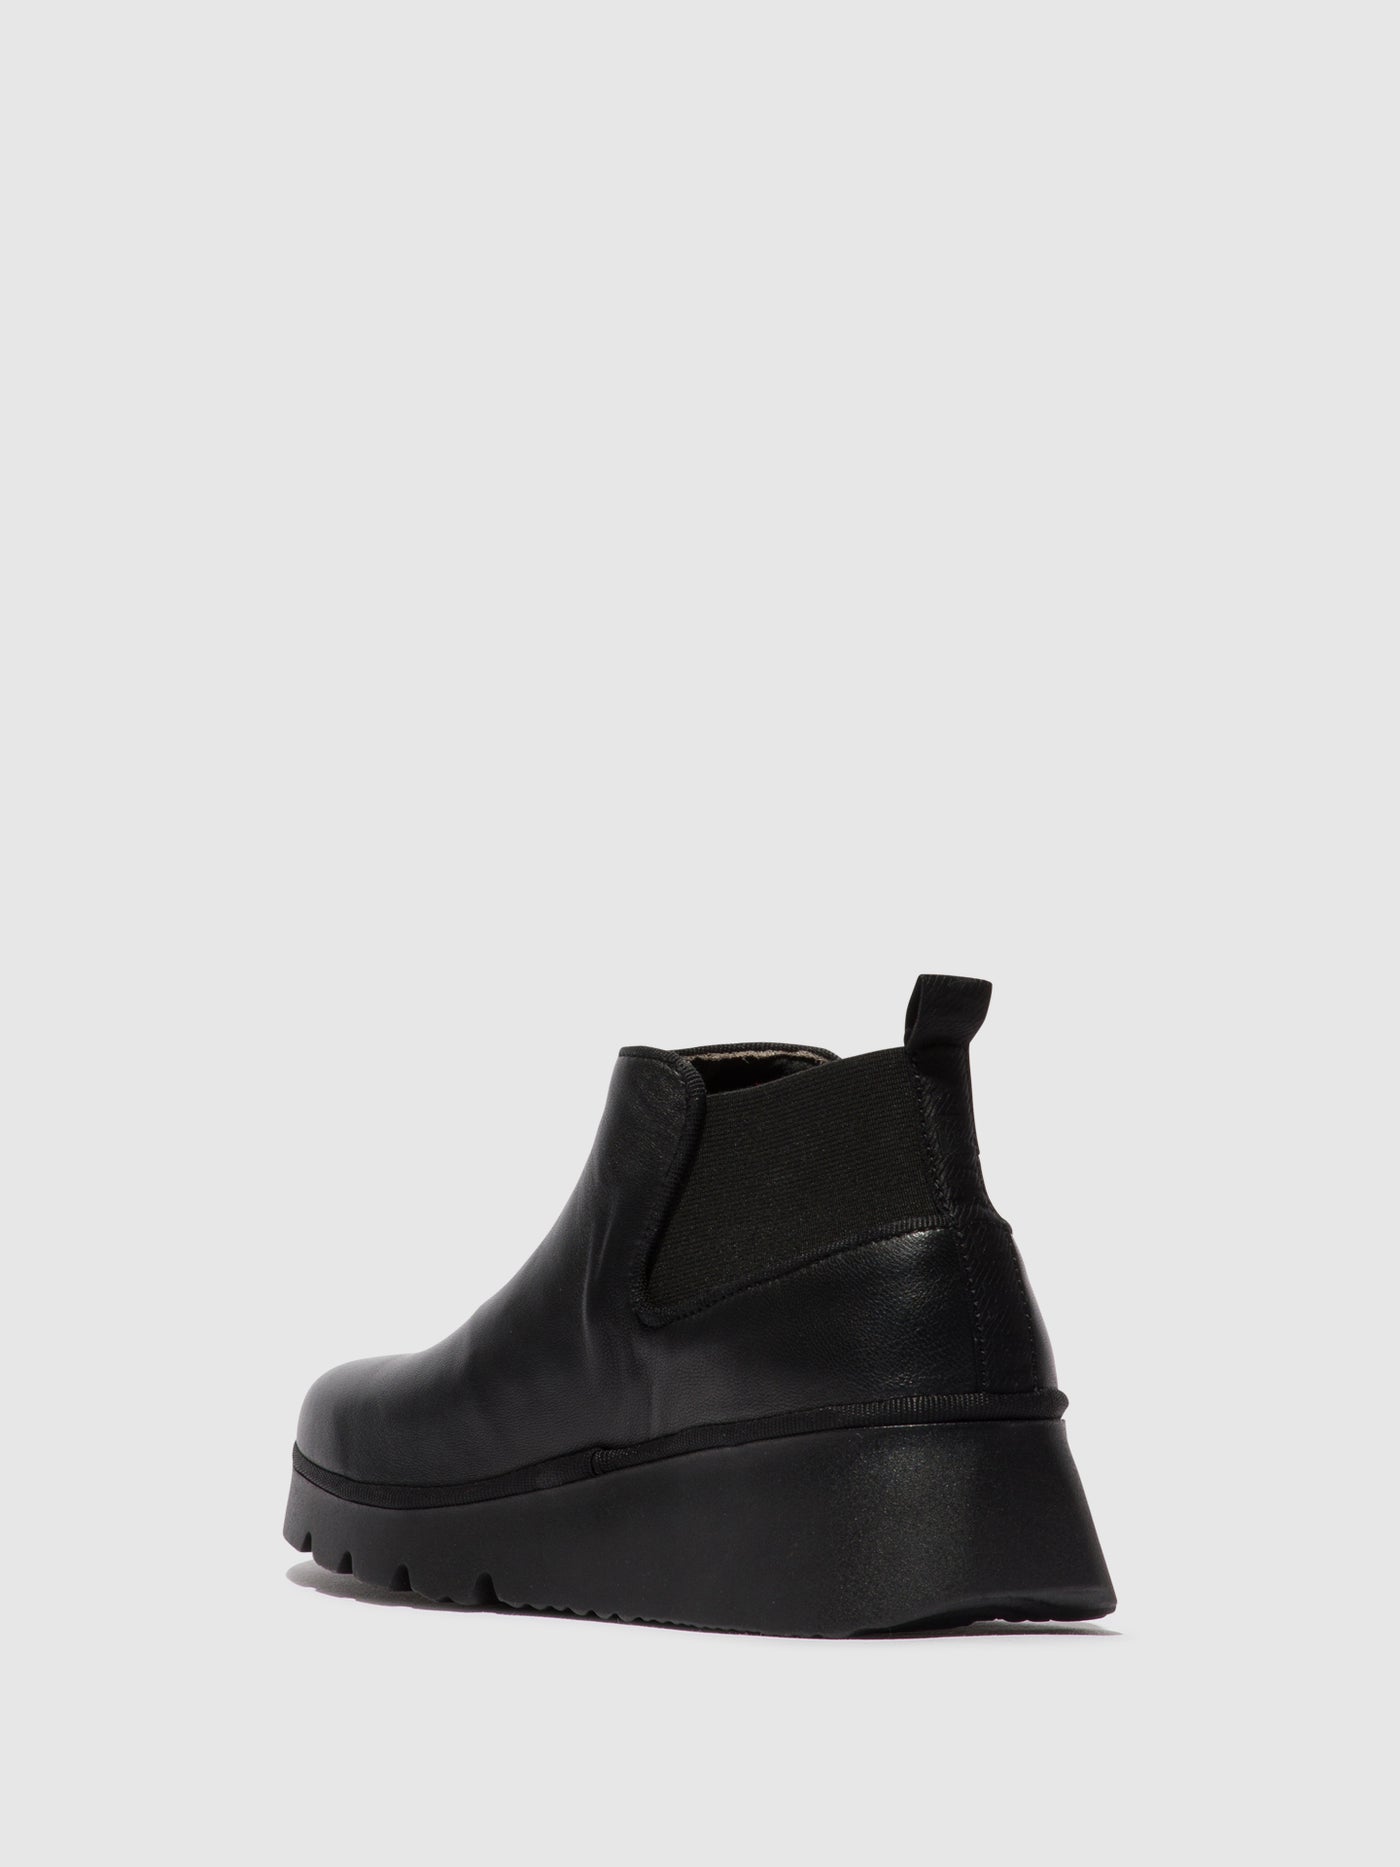 Elasticated Ankle Boots PADA403FLY BLACK